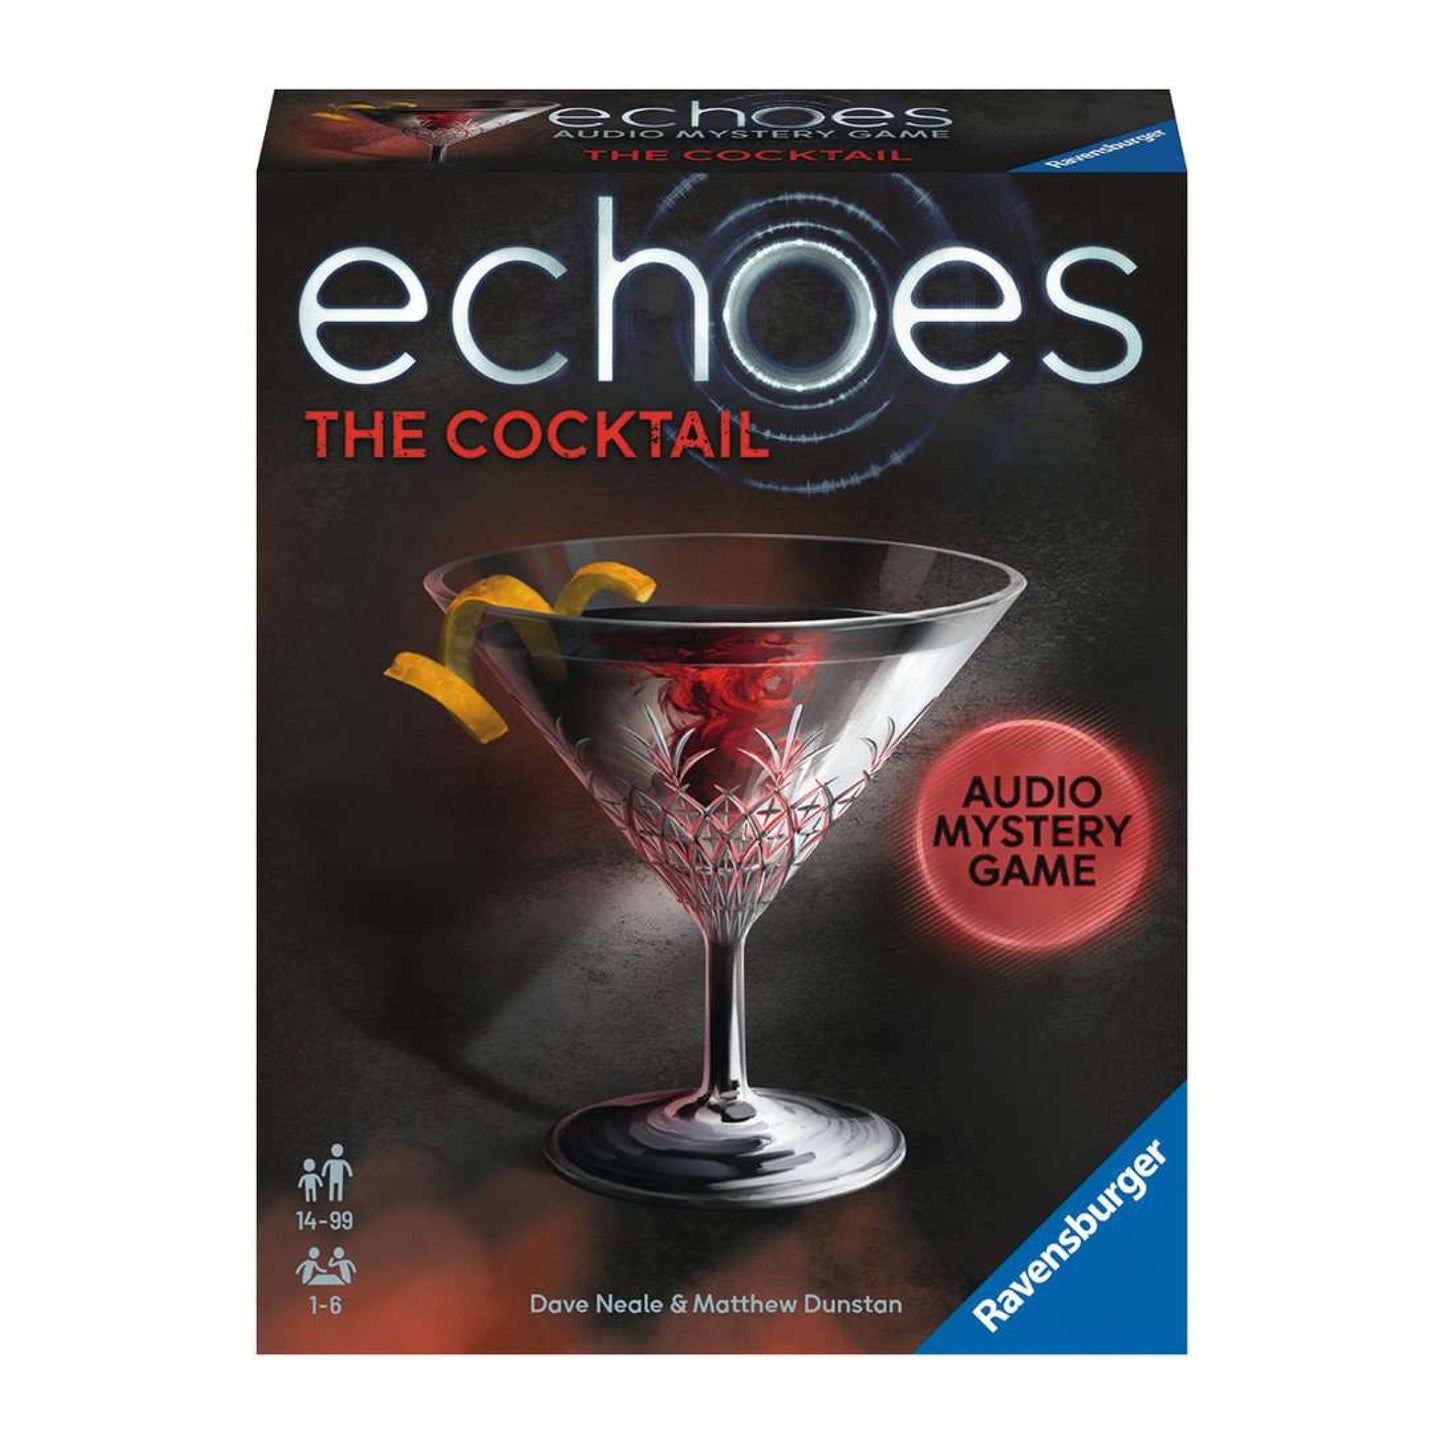 Echoes: The Cocktail